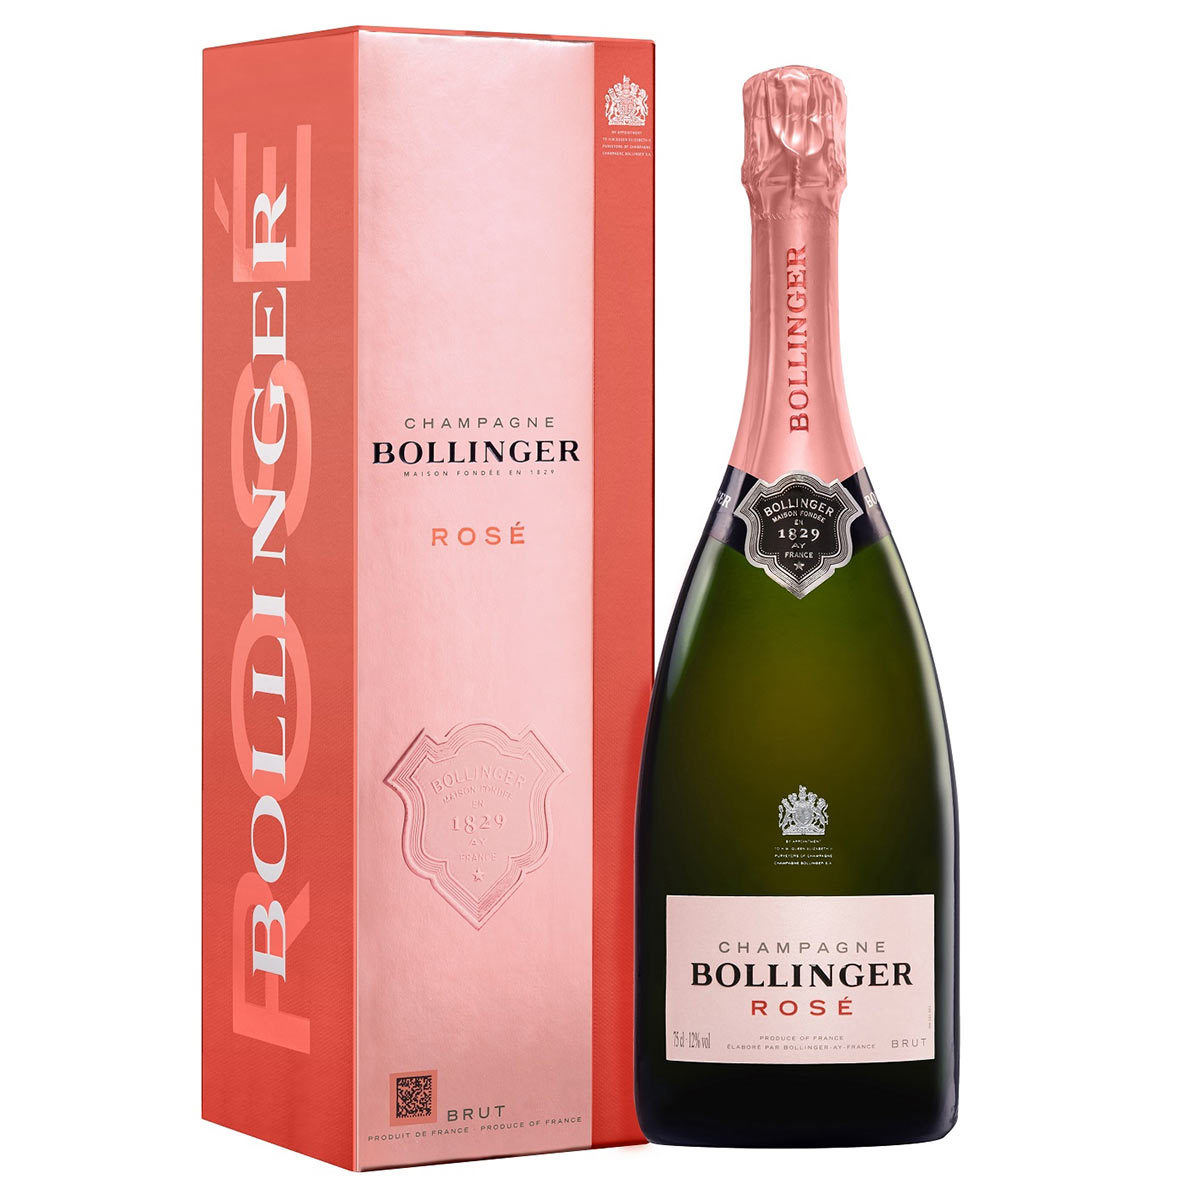 Single Bottle of Bollinger NV Rose Champagne, 75cl with Gift Box